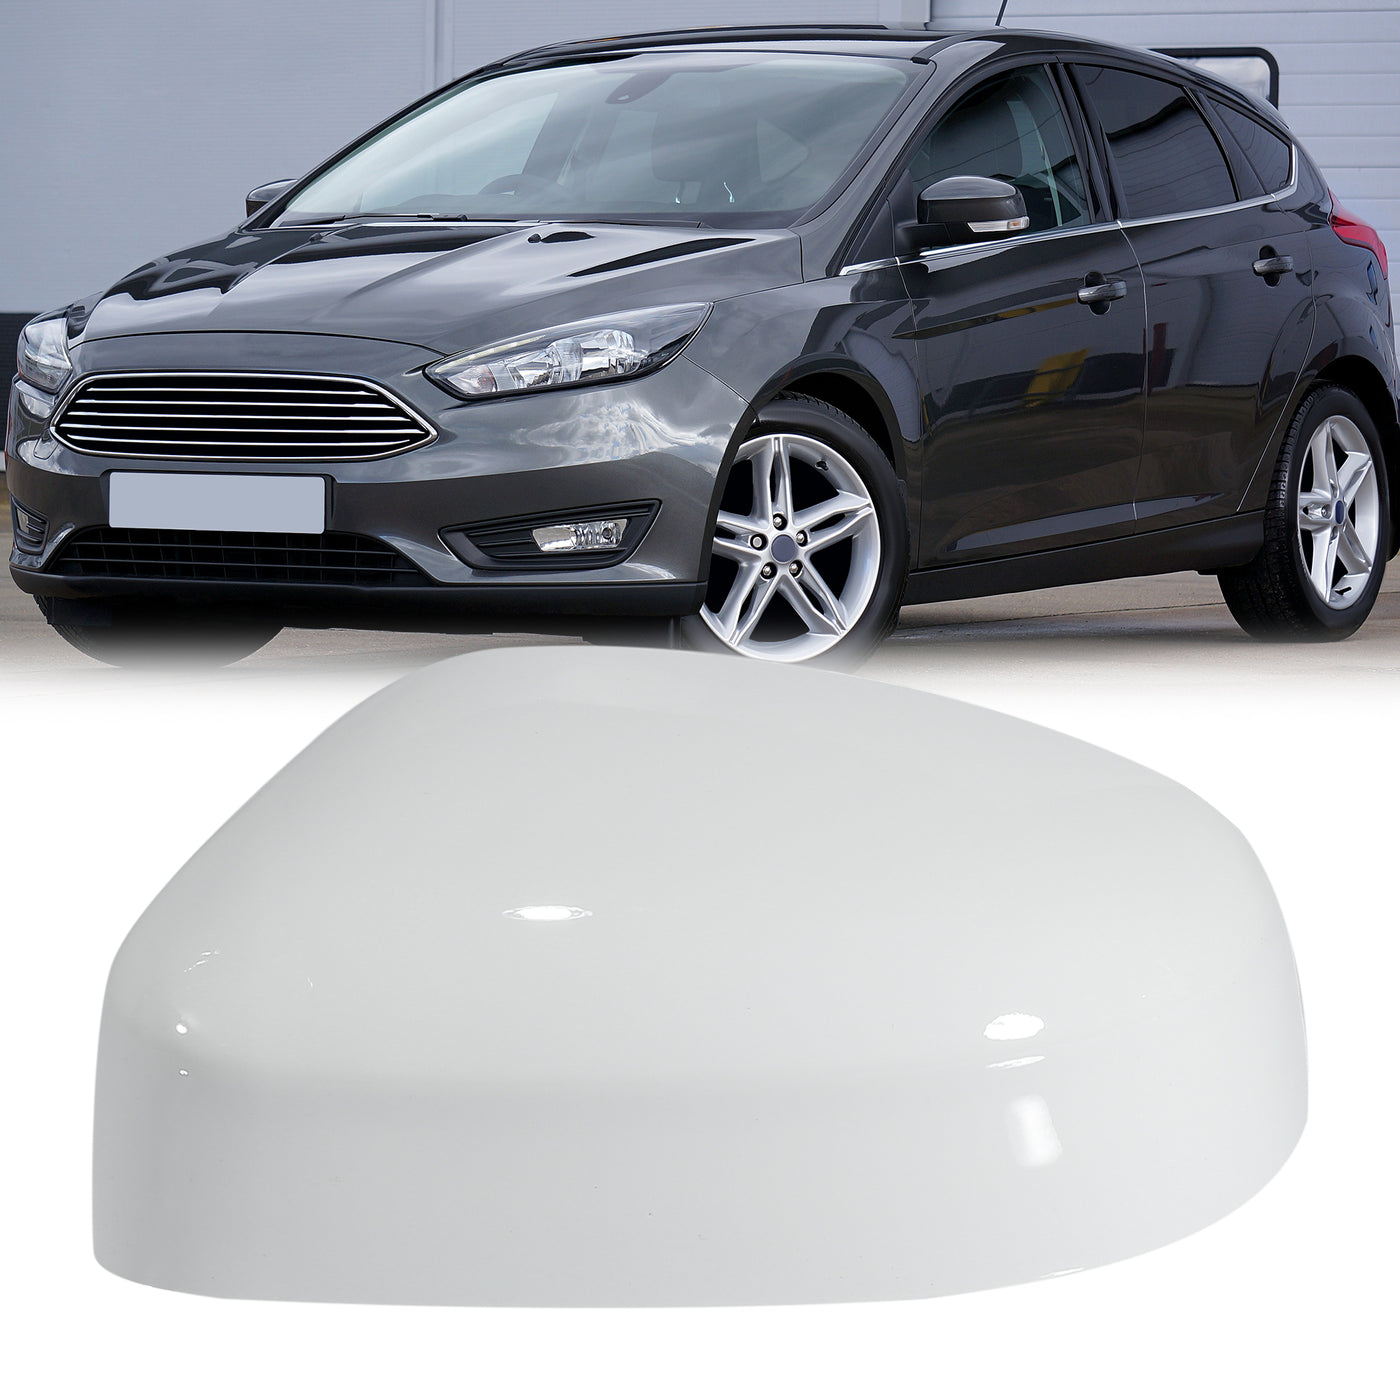 X AUTOHAUX White Left Side Car Side Door Wing Mirror Cover Rear View Mirror Cap for Ford Focus MK2 Facelift 2008-2011 for Ford Focus MK3 2012-2017